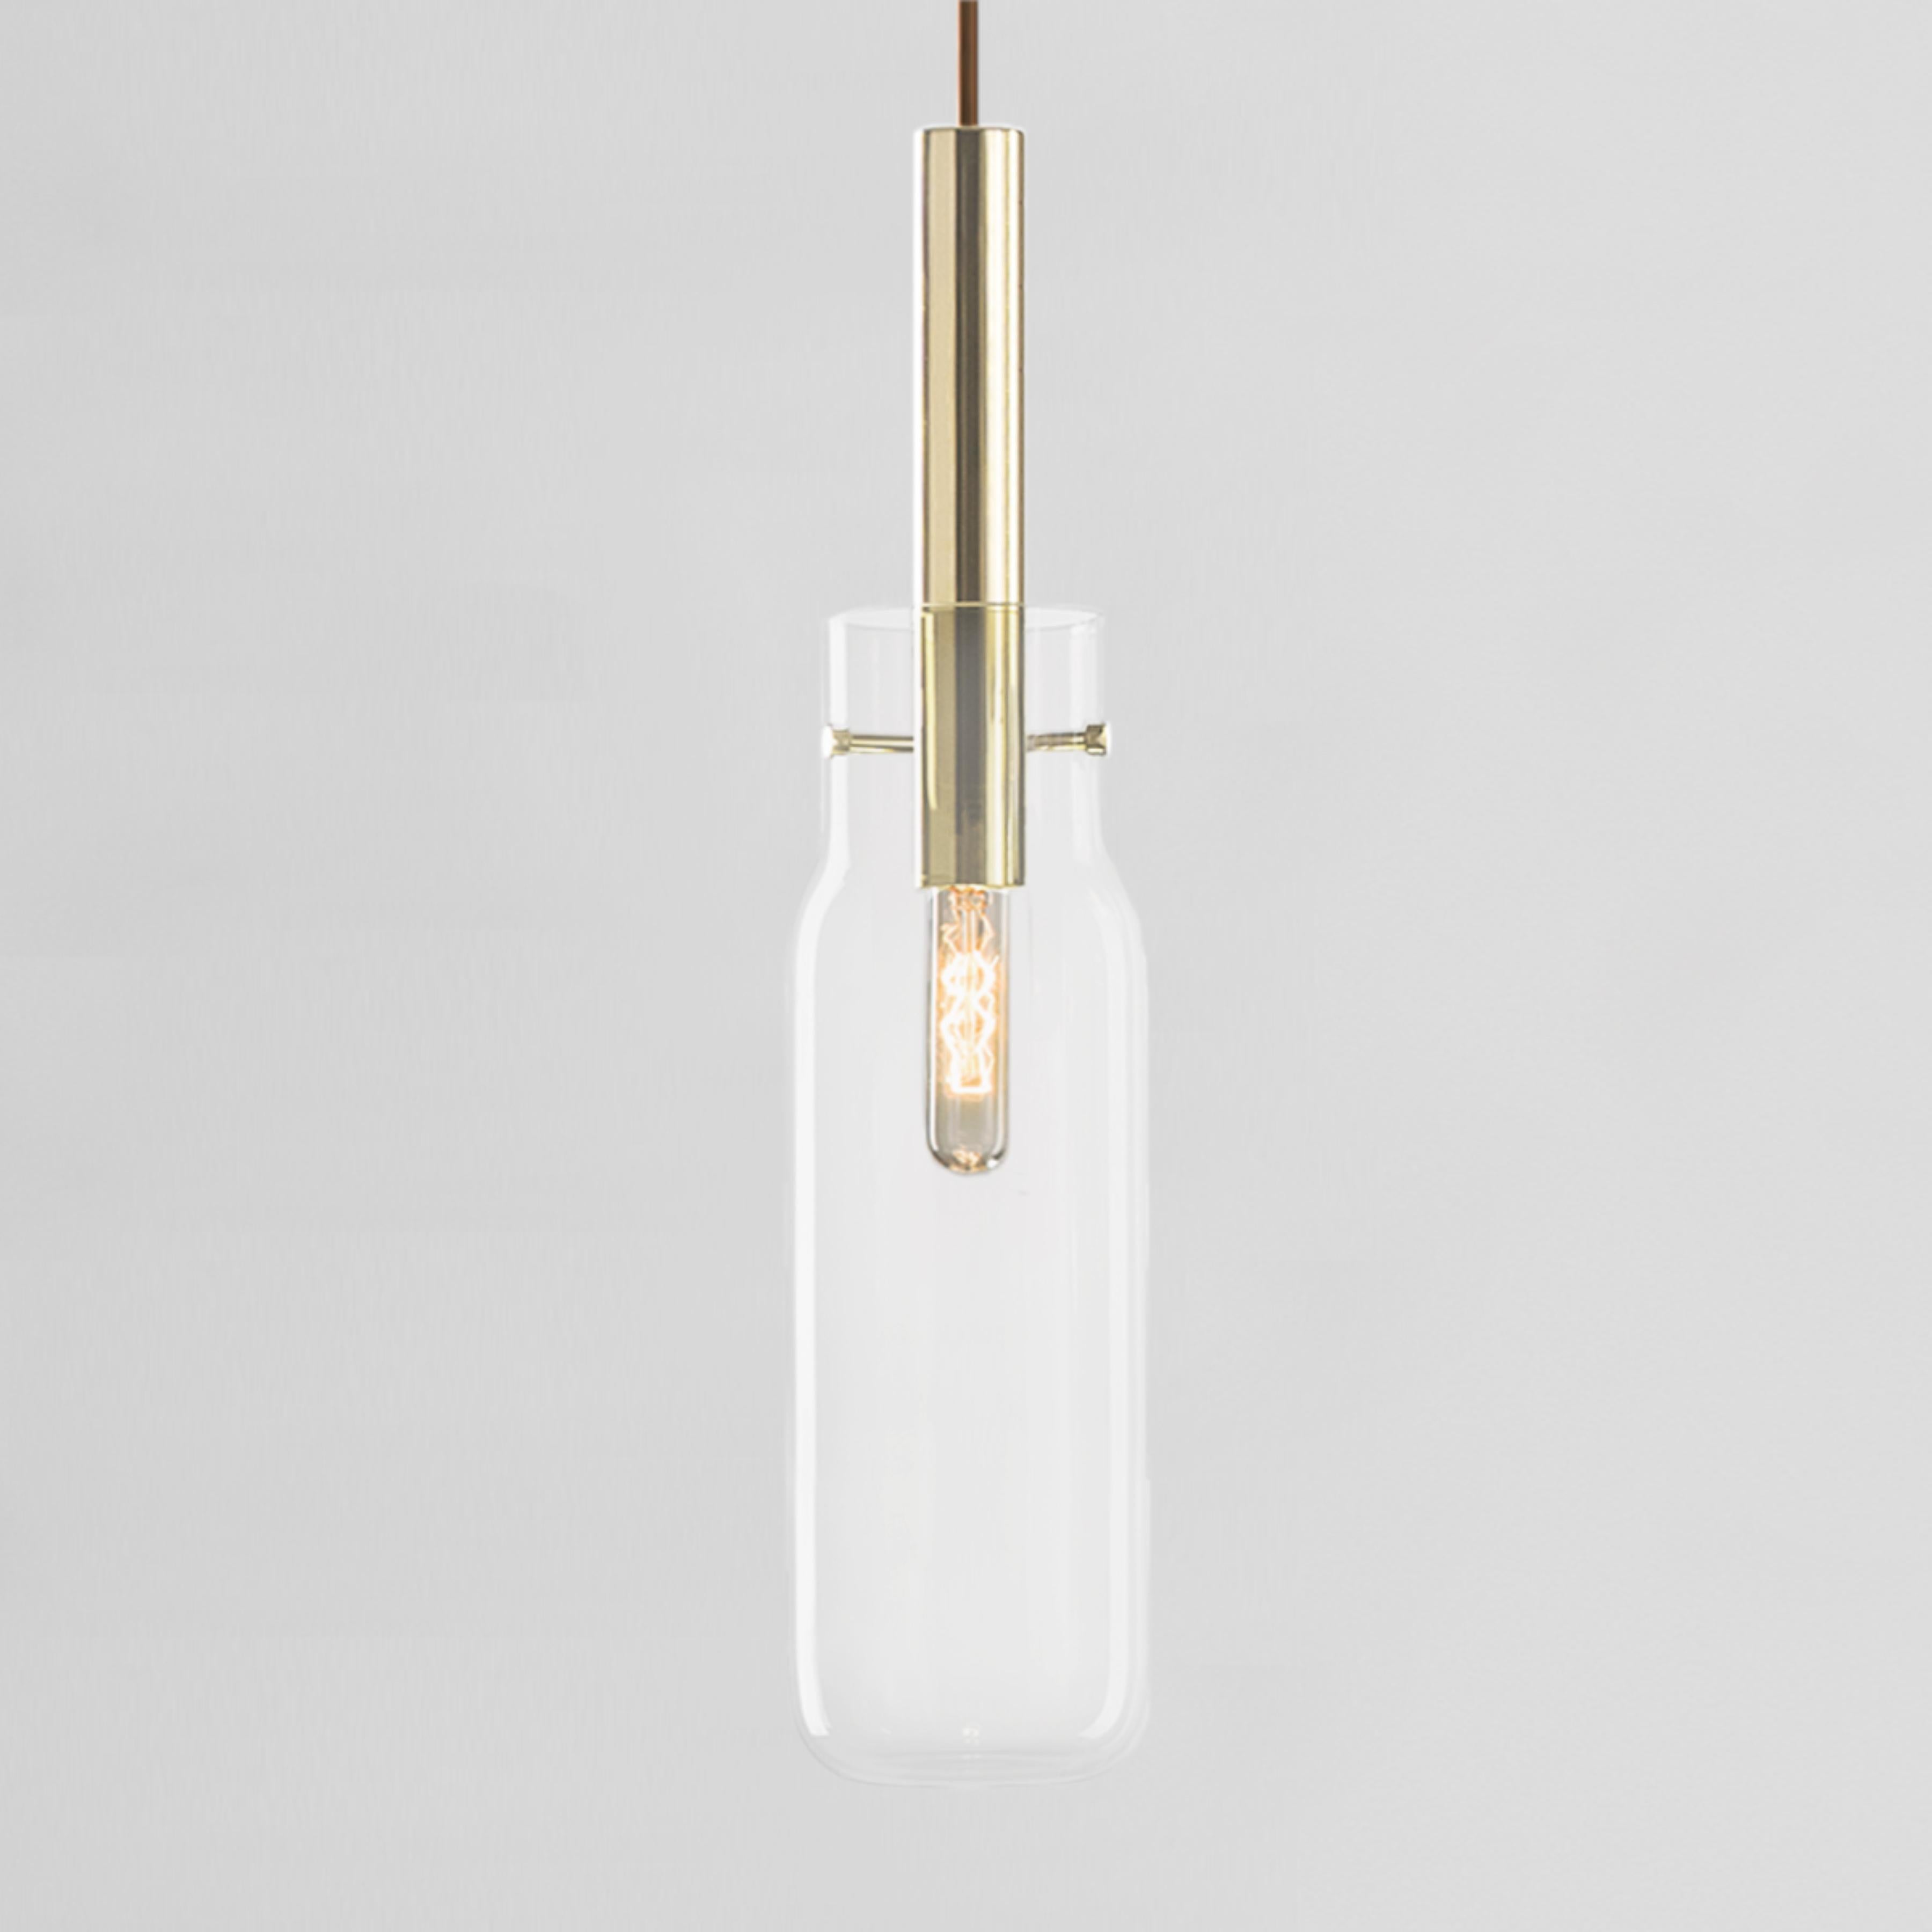 Tall Bandaska pendant light by Dechem Studio
Dimensions: D 9 x H 180 cm
Materials: Brass, Glass.
Also Available: Different colours and sizes available.

hand blown into beechwood moulds, Bandaska Lights is based on the highly popular Bandaska